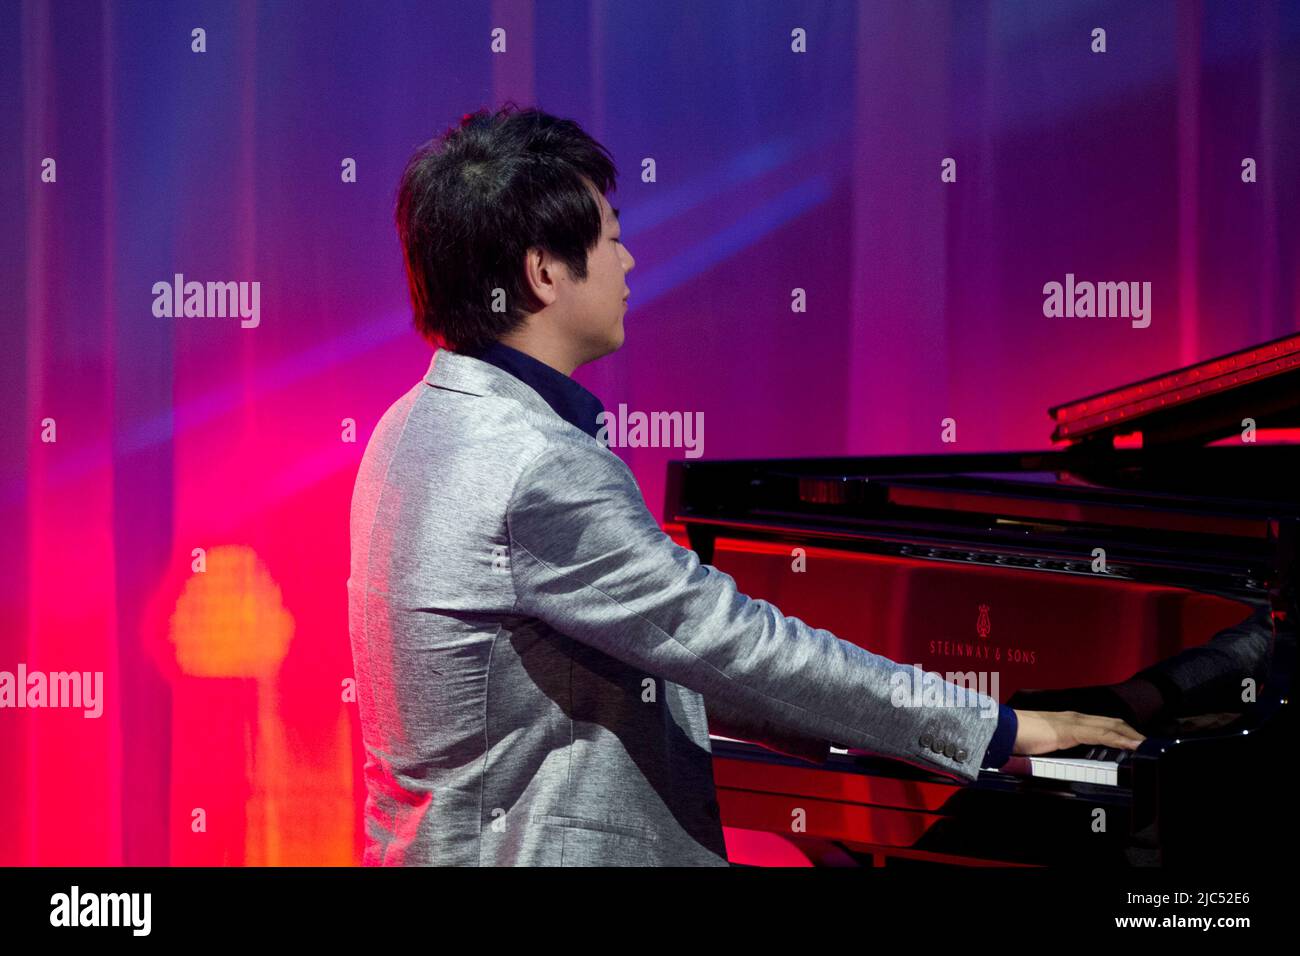 ARCHIVE PHOTO: LANG LANG turns 40 on June 14, 2022, LANG LANG, pianist,  "Welcome to Carmen Nebel", ZDF, on February 25, 2012 from Bremen, å Stock  Photo - Alamy